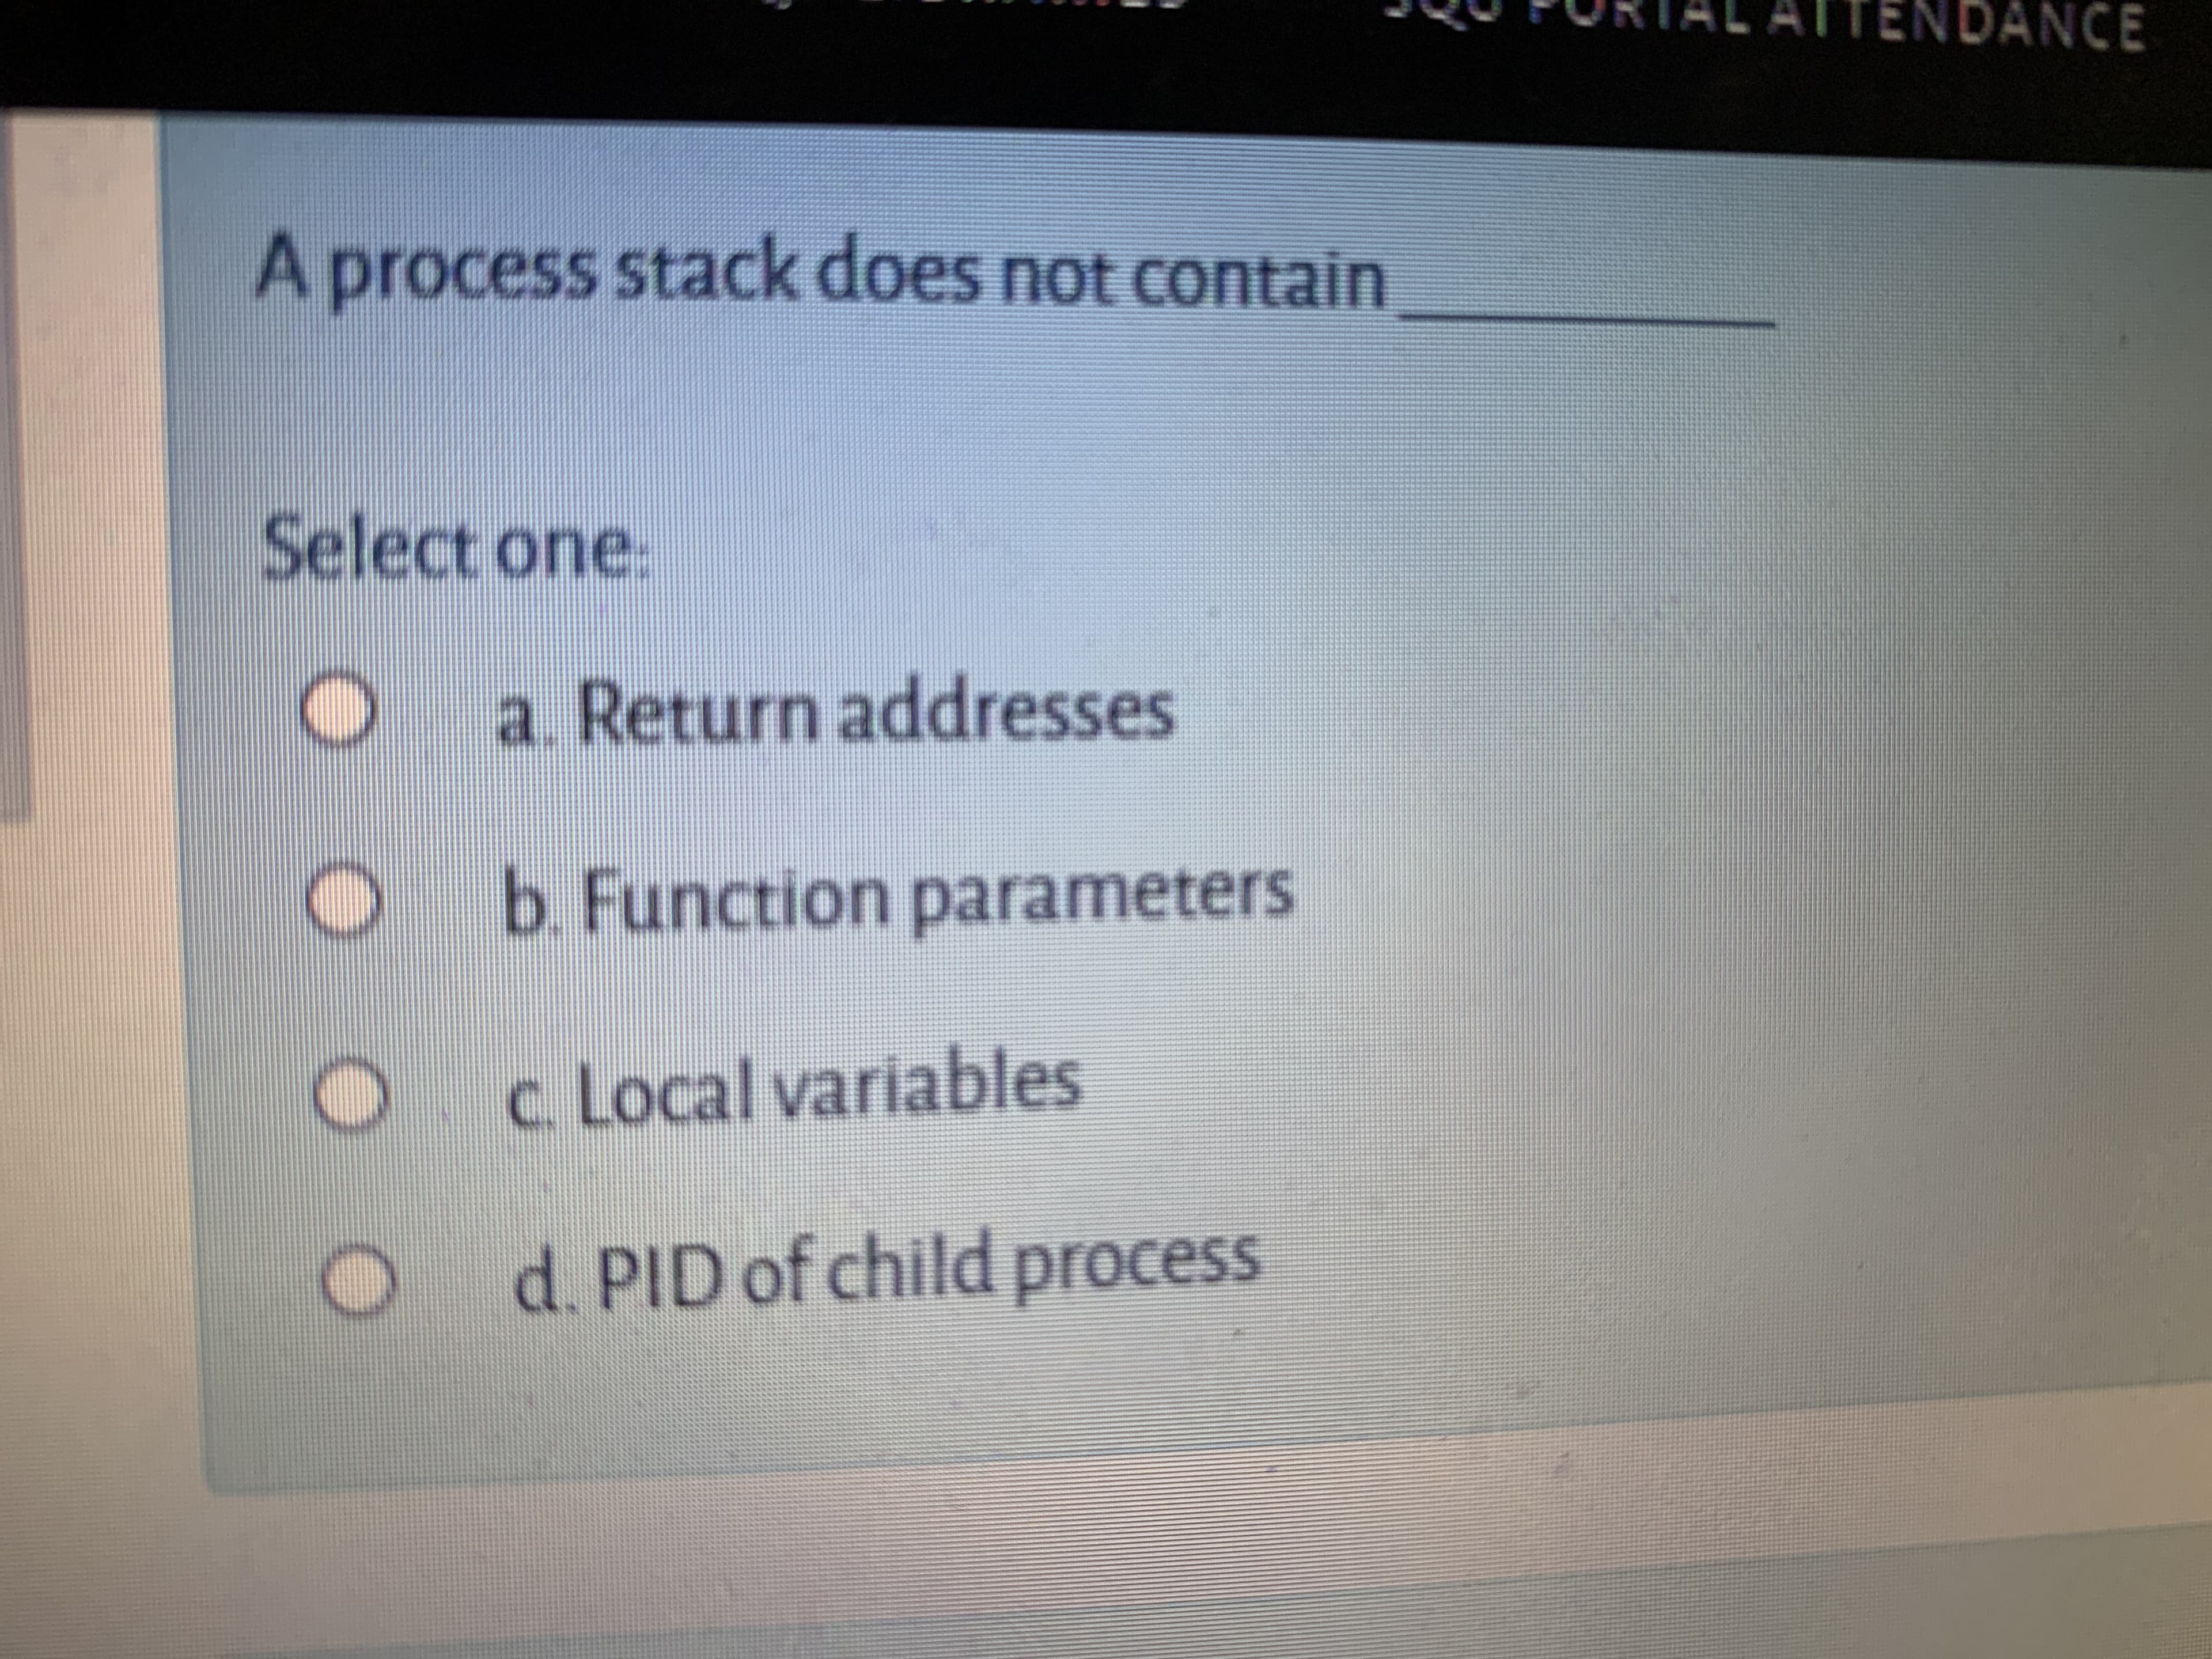 Aprocess stack does not contain
